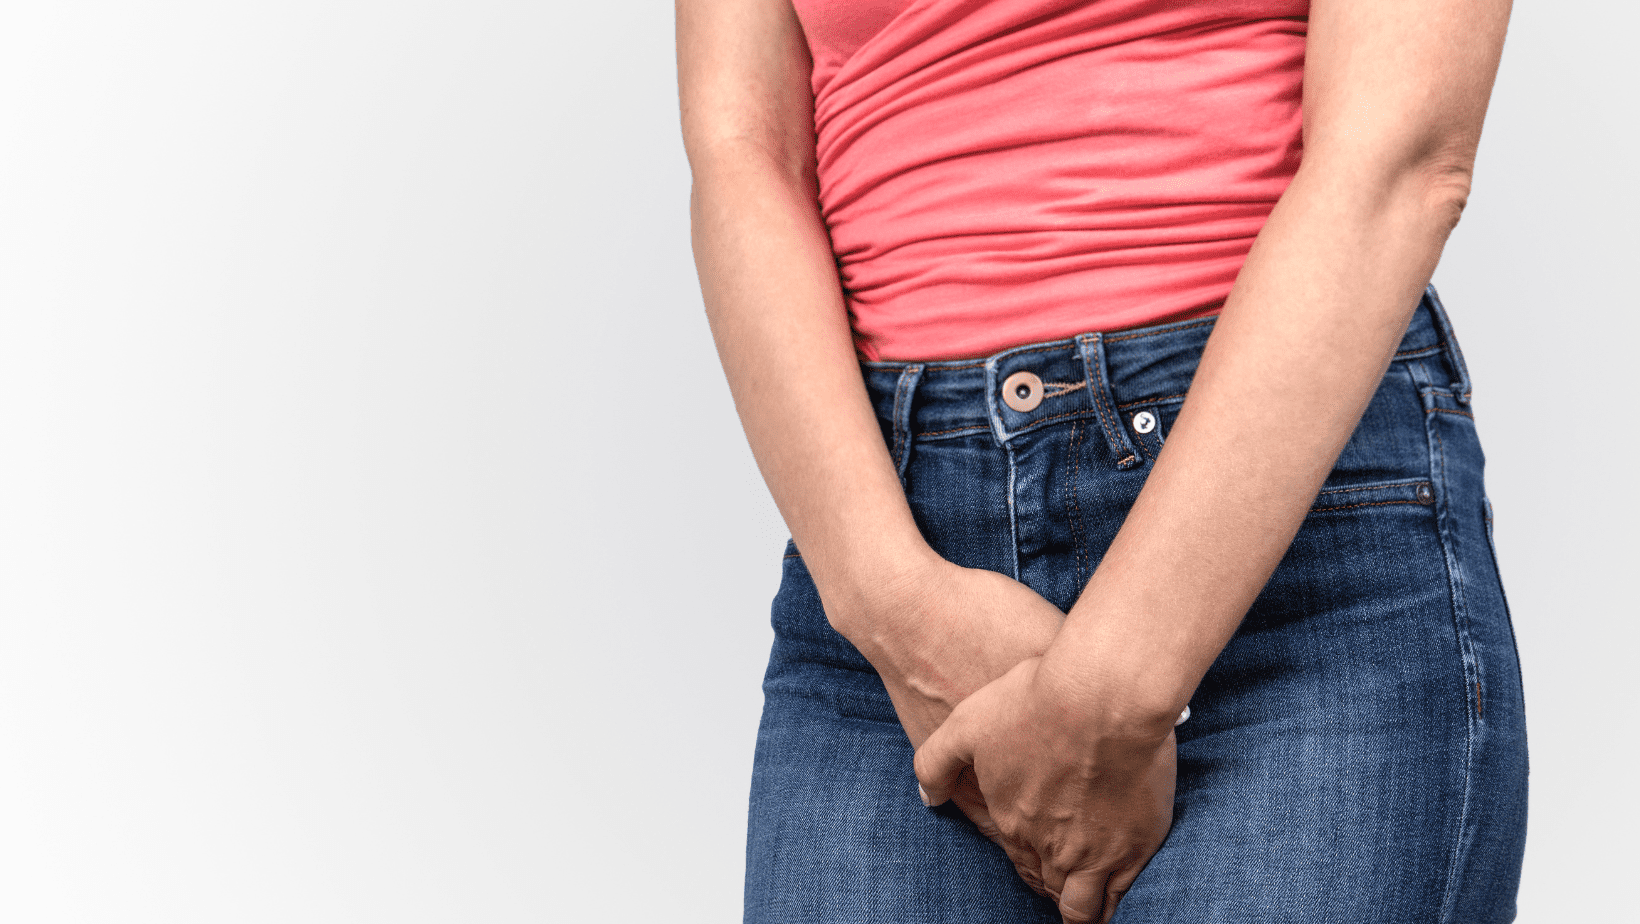 Will Urinary Incontinence Go Away? And How Do You Treat It?